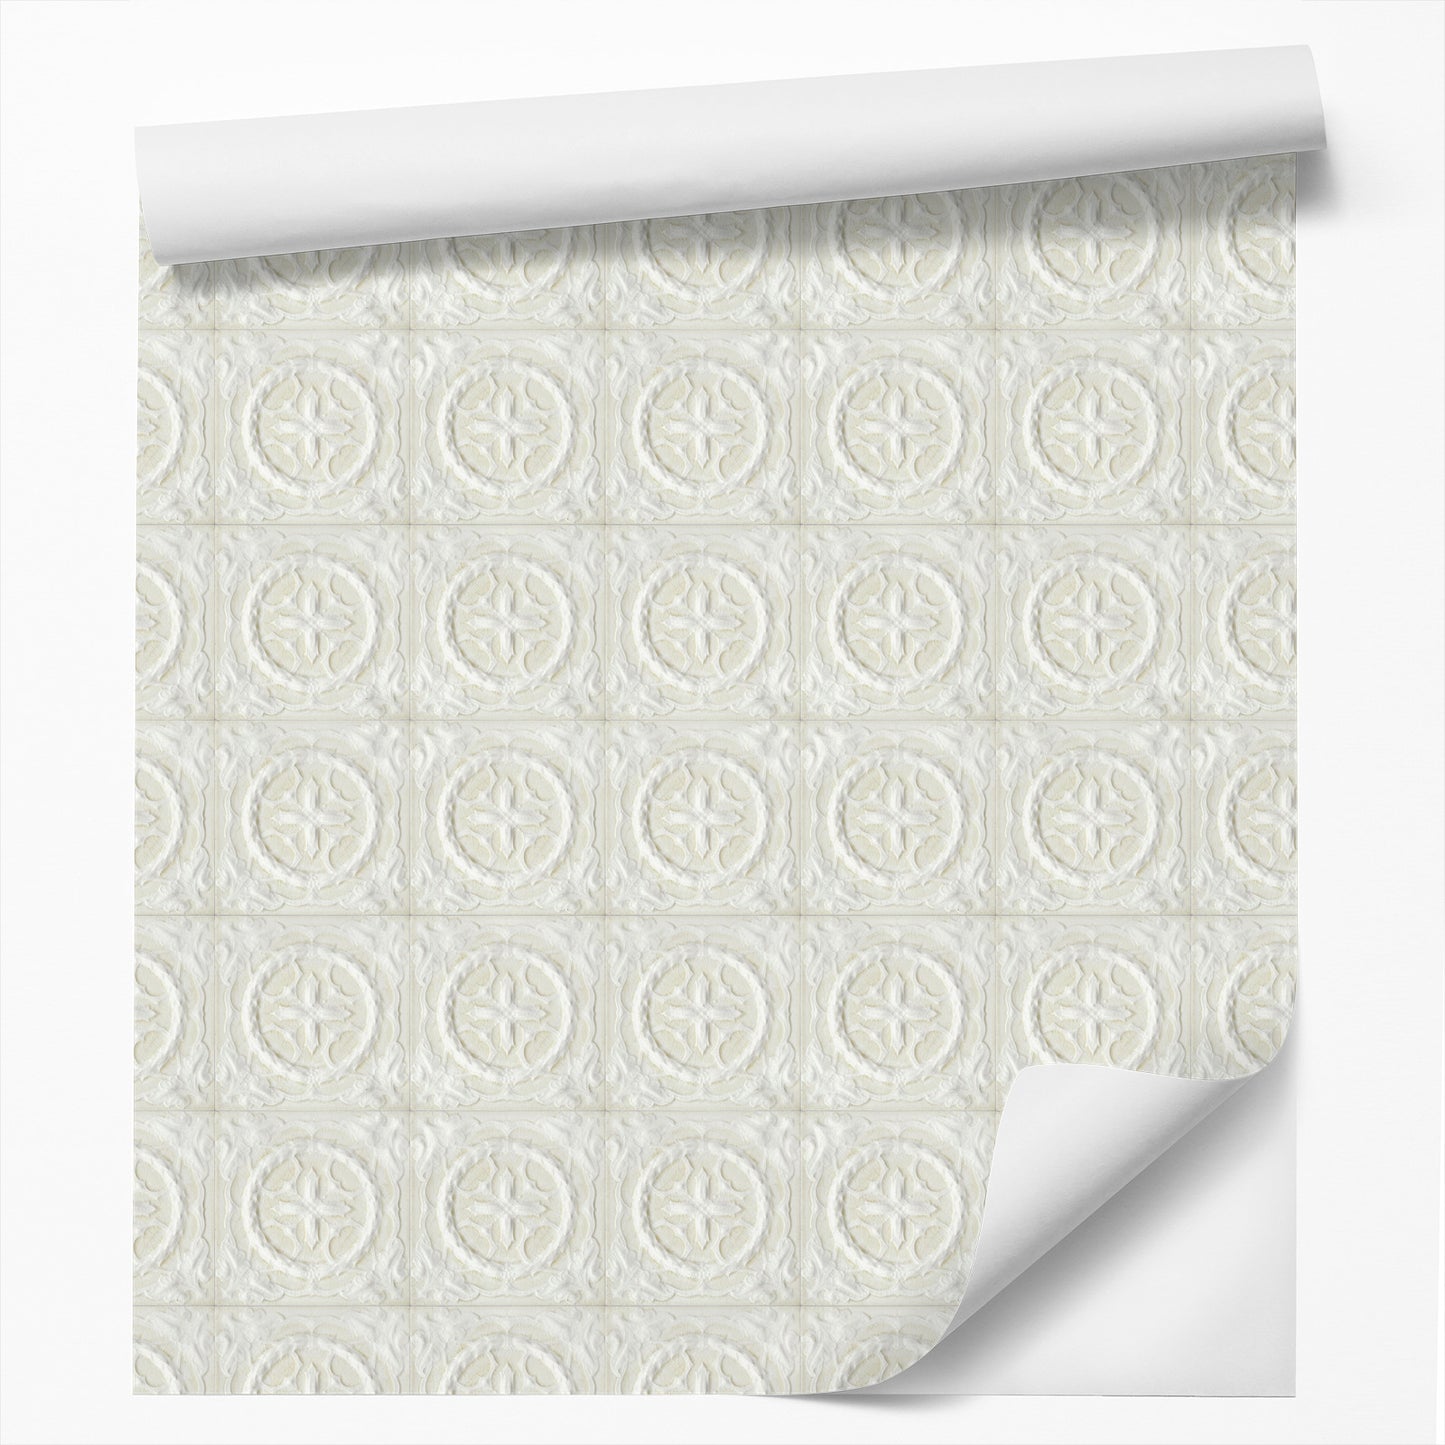 Peel & Stick Wallpaper Roll - Victorian White by DecoWorks